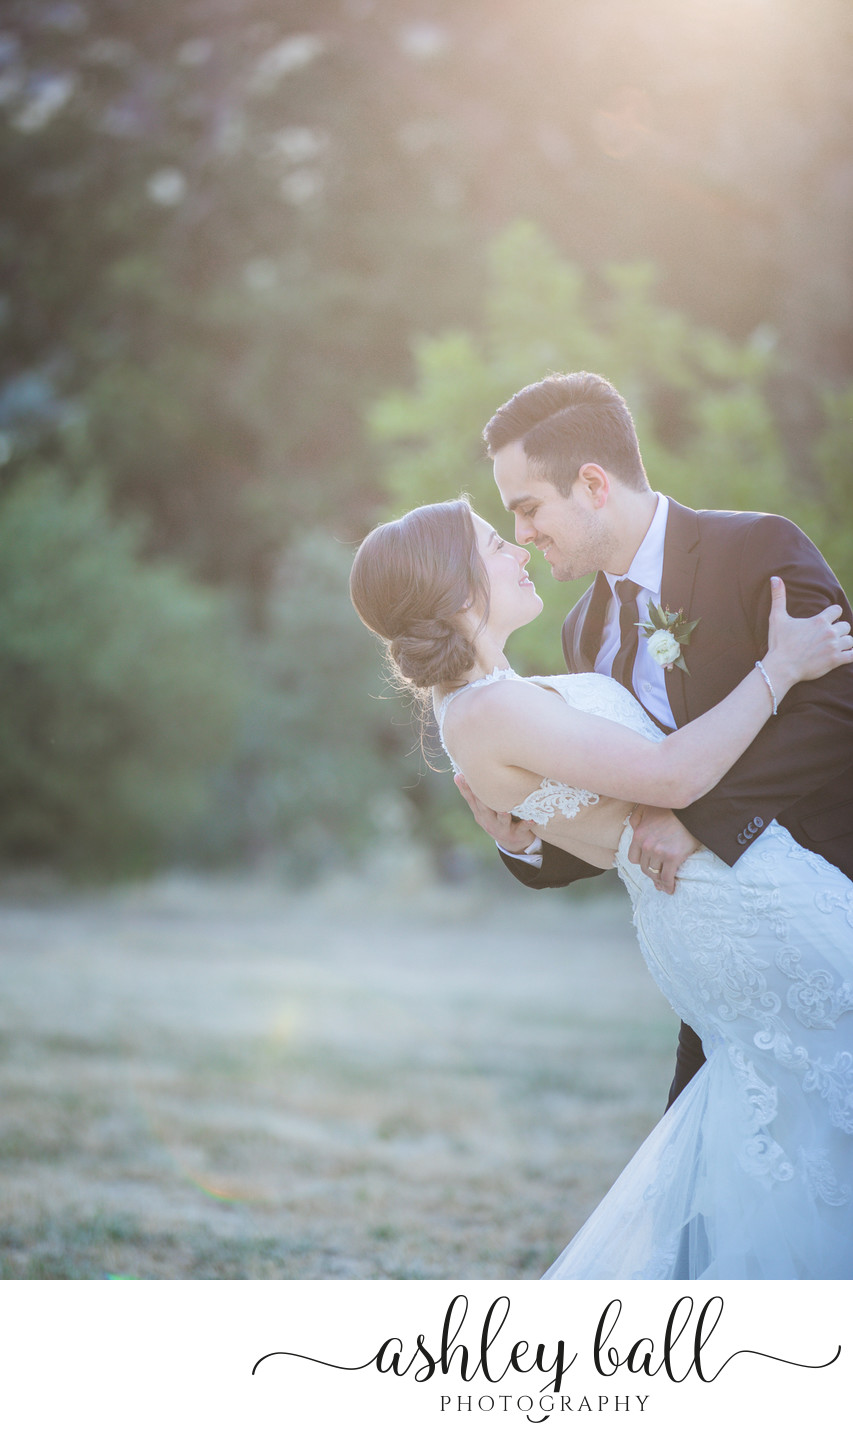 Romantic sunset photos of bride and groom in Vacaville